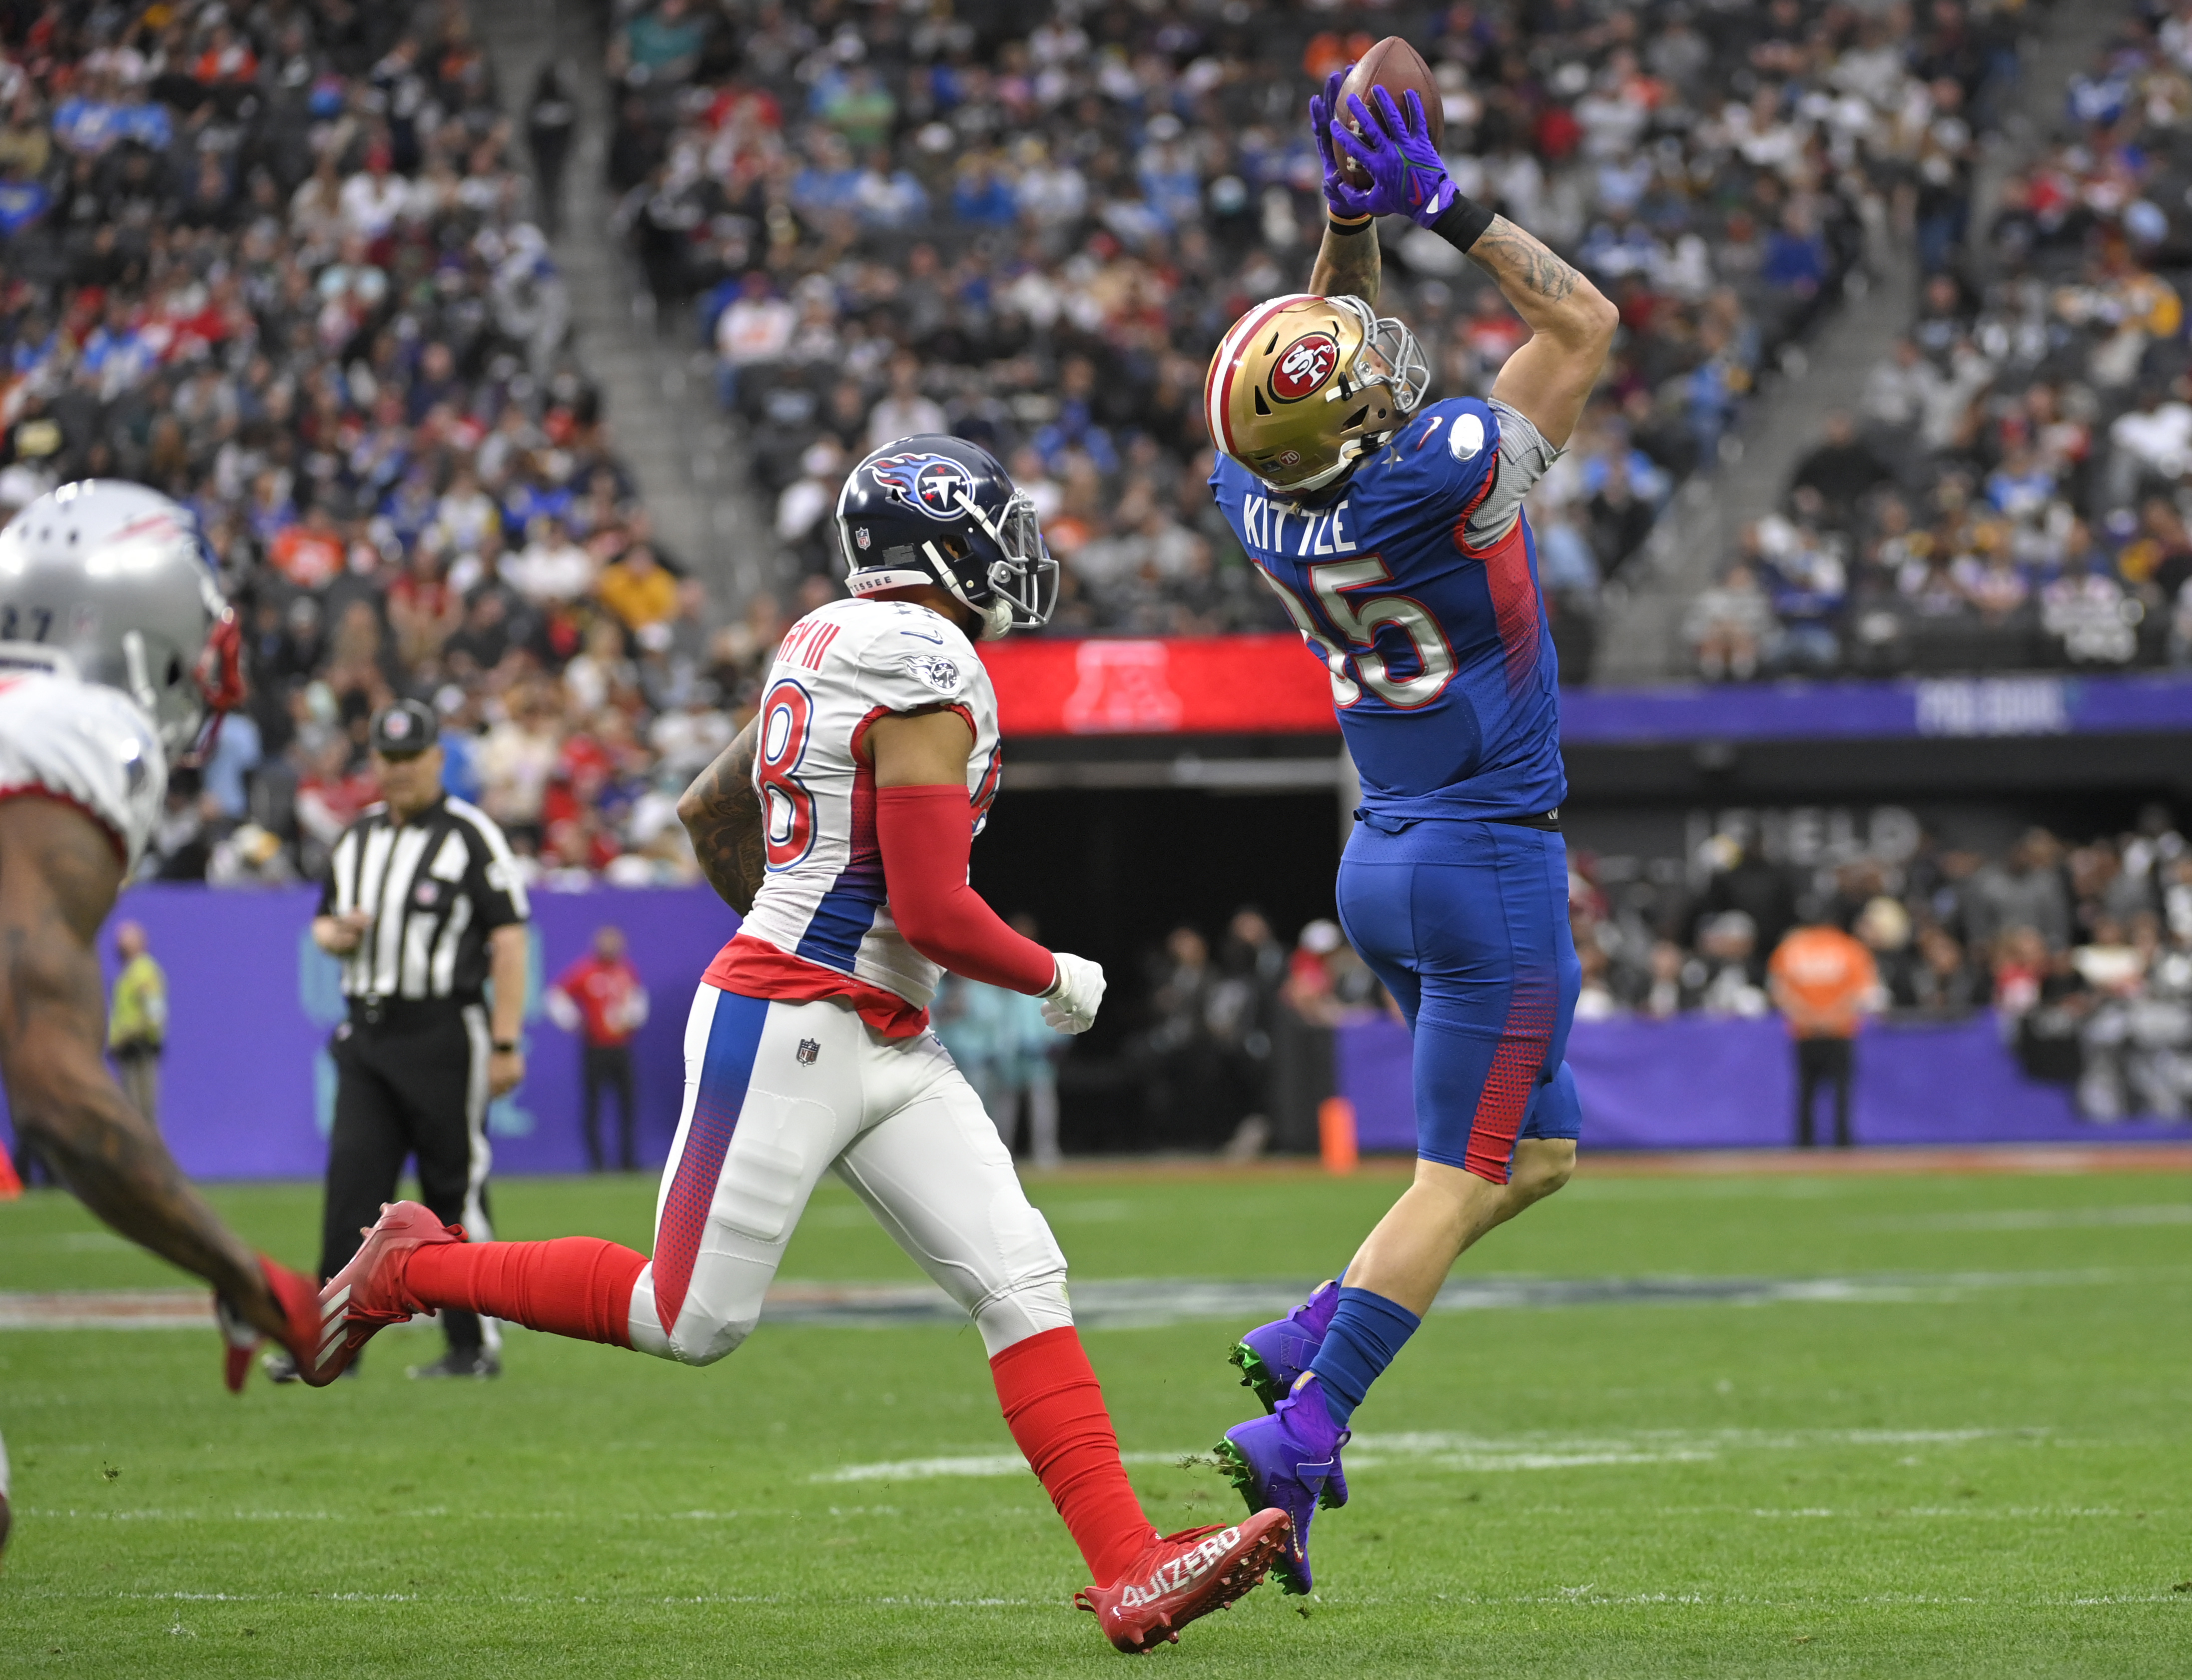 NFL's Pro Bowl to be replaced by skills competition, flag football game